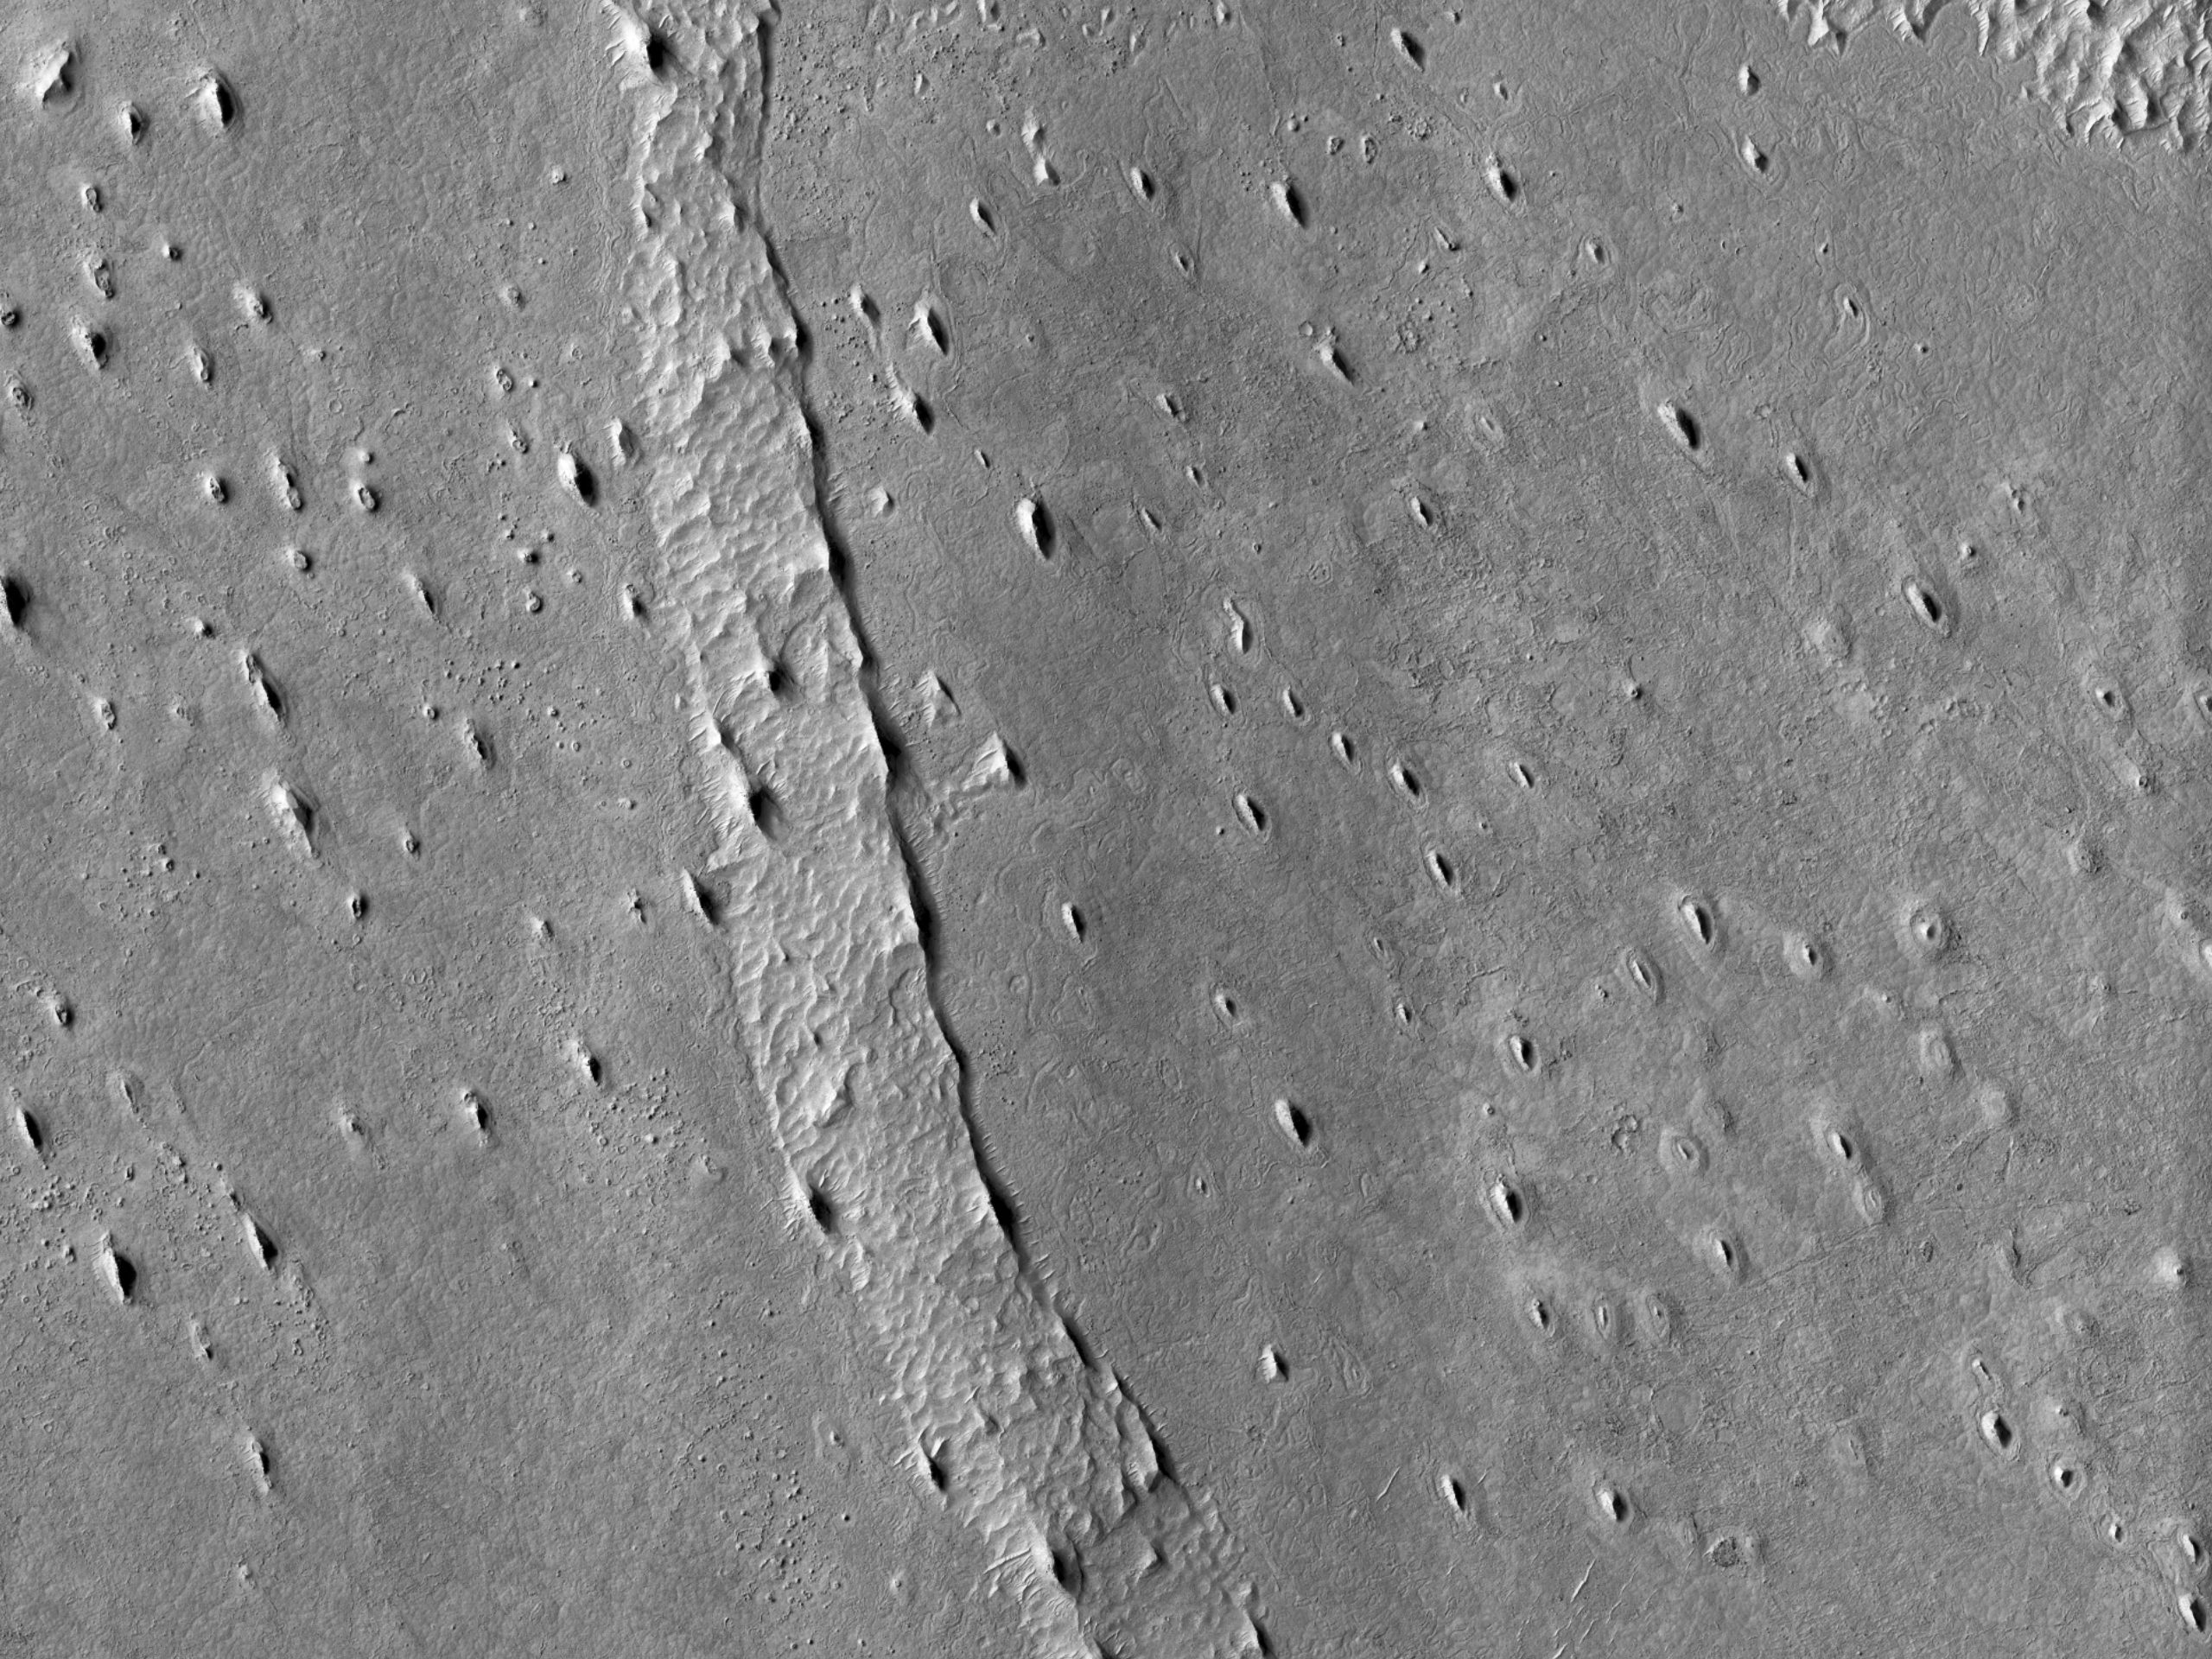 Sinuous Ridge Emergent from beneath Crater Ejecta